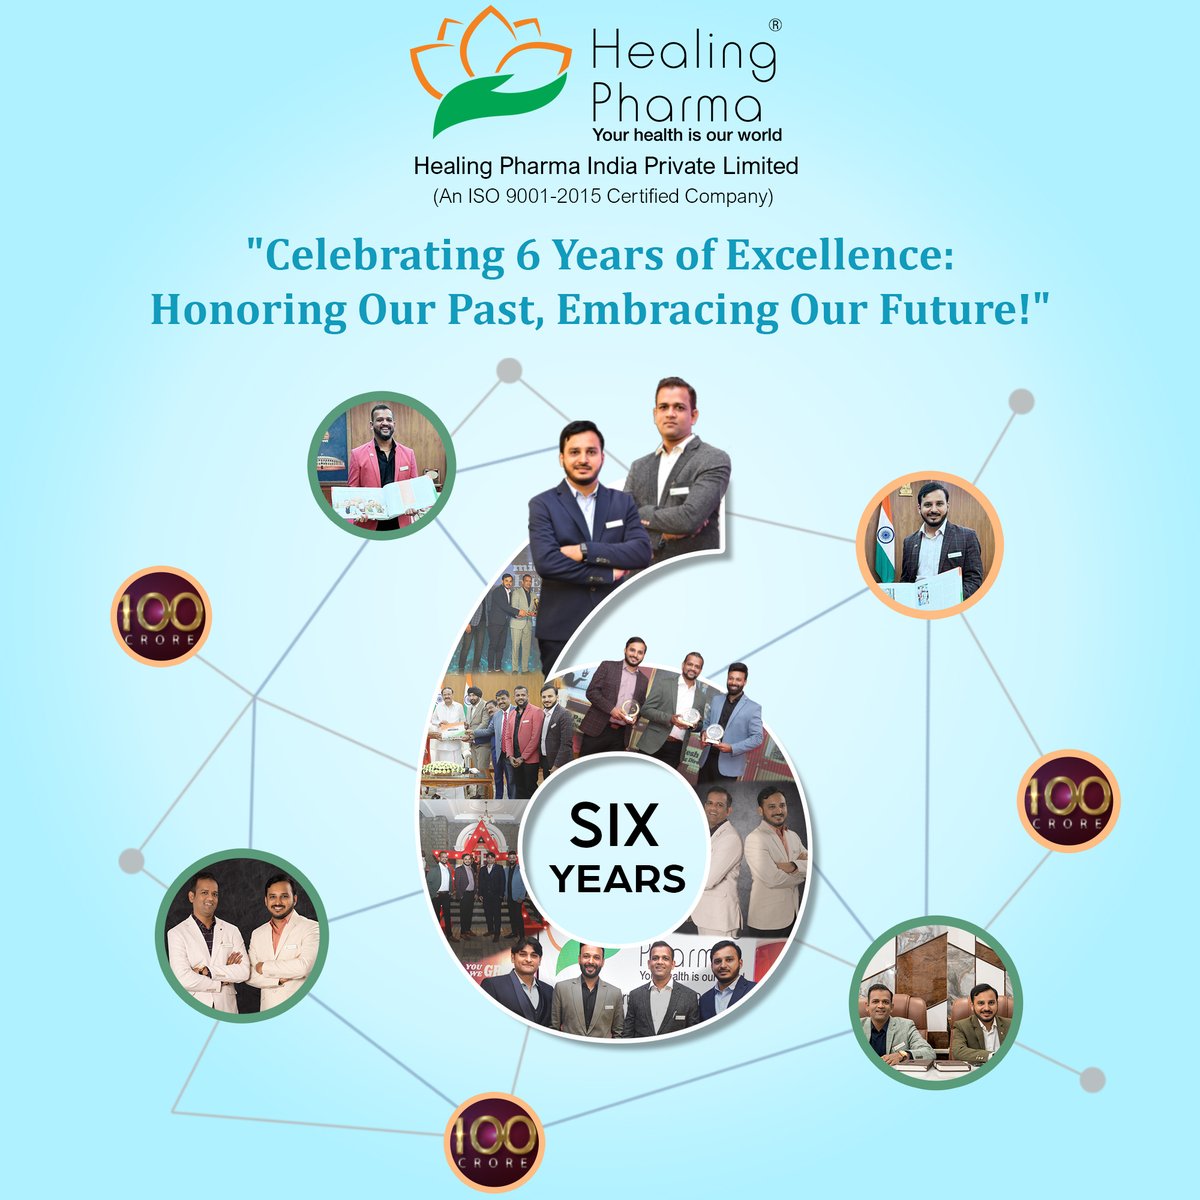 We are proud to announce that we have completed 6 years of bond with healthcare and excellence. Our aim is to bring a change in healthcare, to make healthcare accessible for all.  #6yearscompleted #6yearsofhealingpharmaindiaprivatelimited  #pharmacompany #healthcareproduct